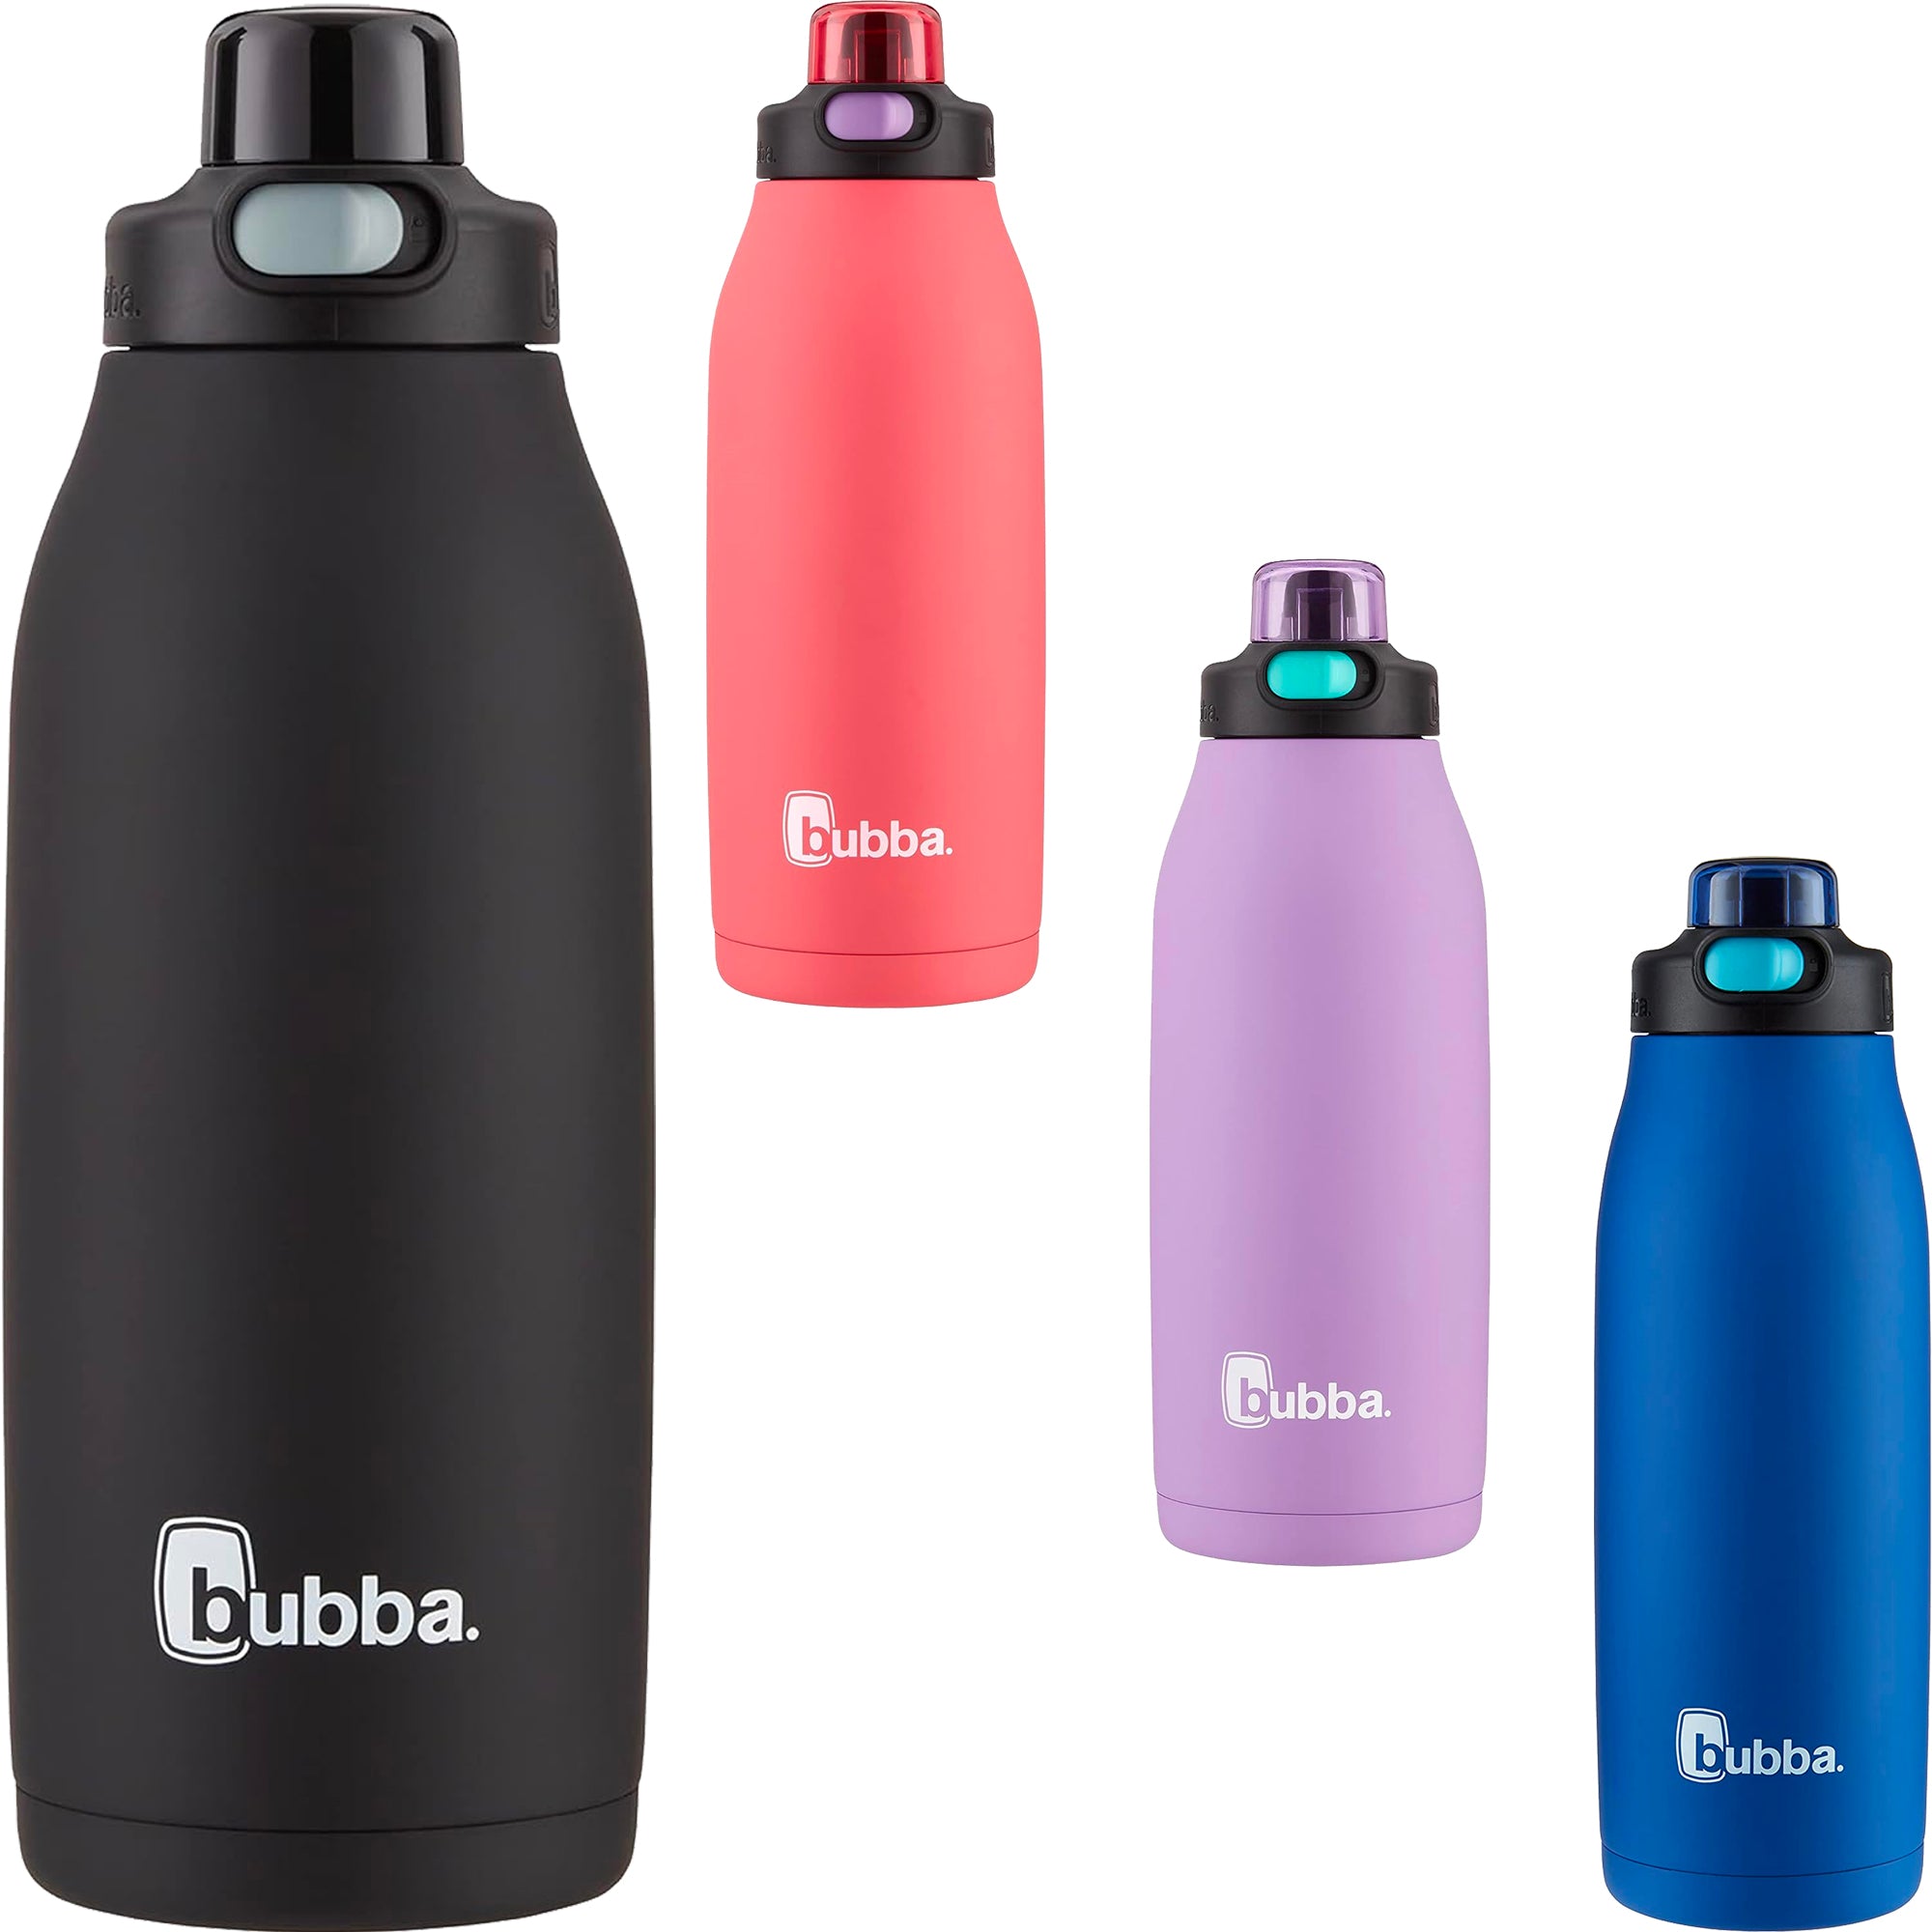 bubba Radiant Stainless Steel Rubberized Water Bottle with Straw, 24 Oz,  Island Teal 